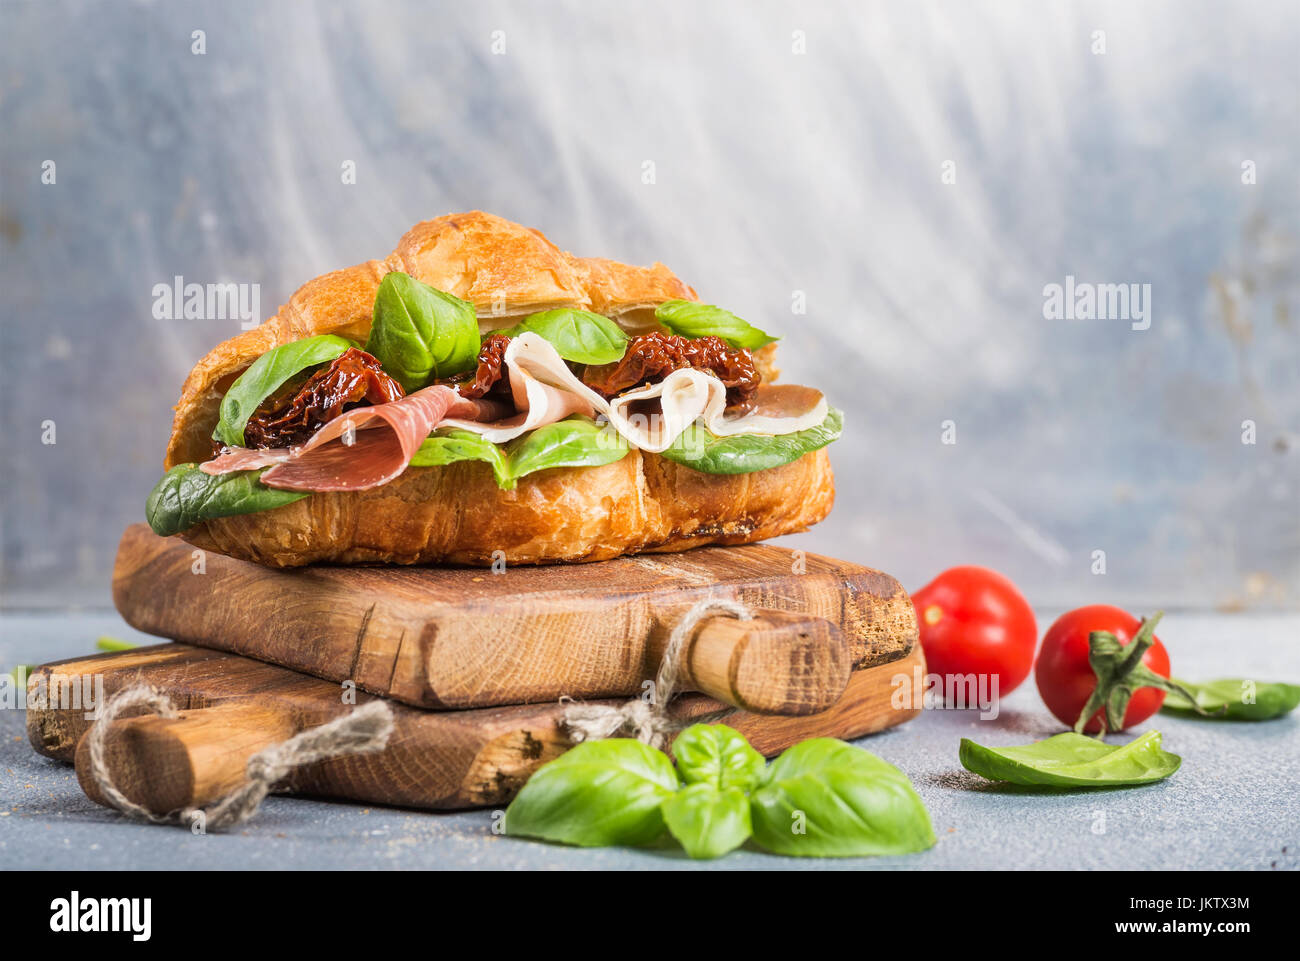 Croissant sandwich with smoked meat Prosciutto di Parma, sun dried tomatoes, fresh spinach and basil on stone textured grey background Stock Photo